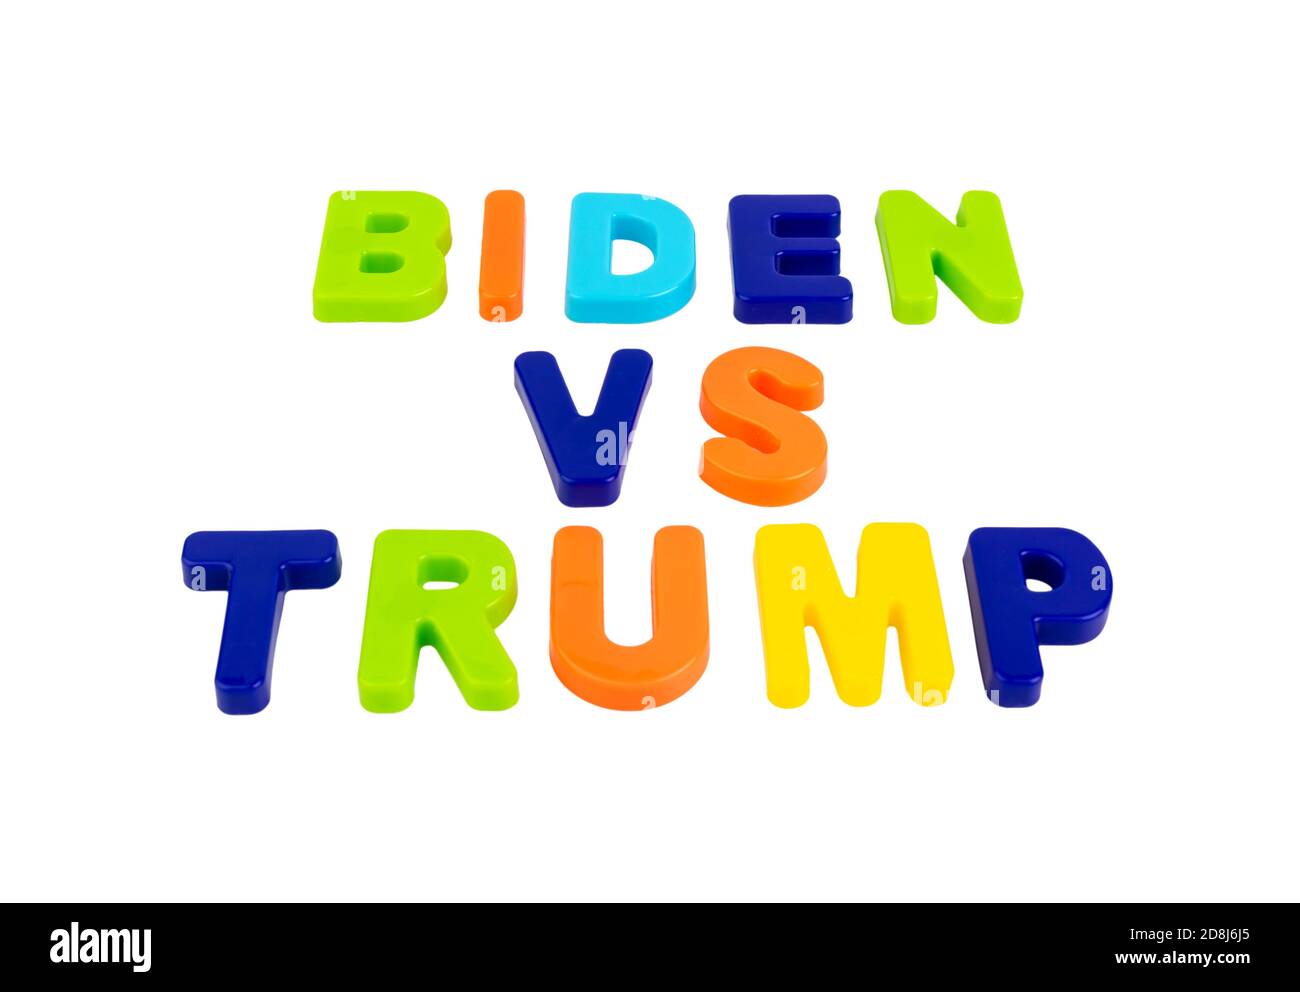 Who Will Become the New President of the United States? Trump or Biden? The names of the presidential candidates written in plastic letters on a white Stock Photo